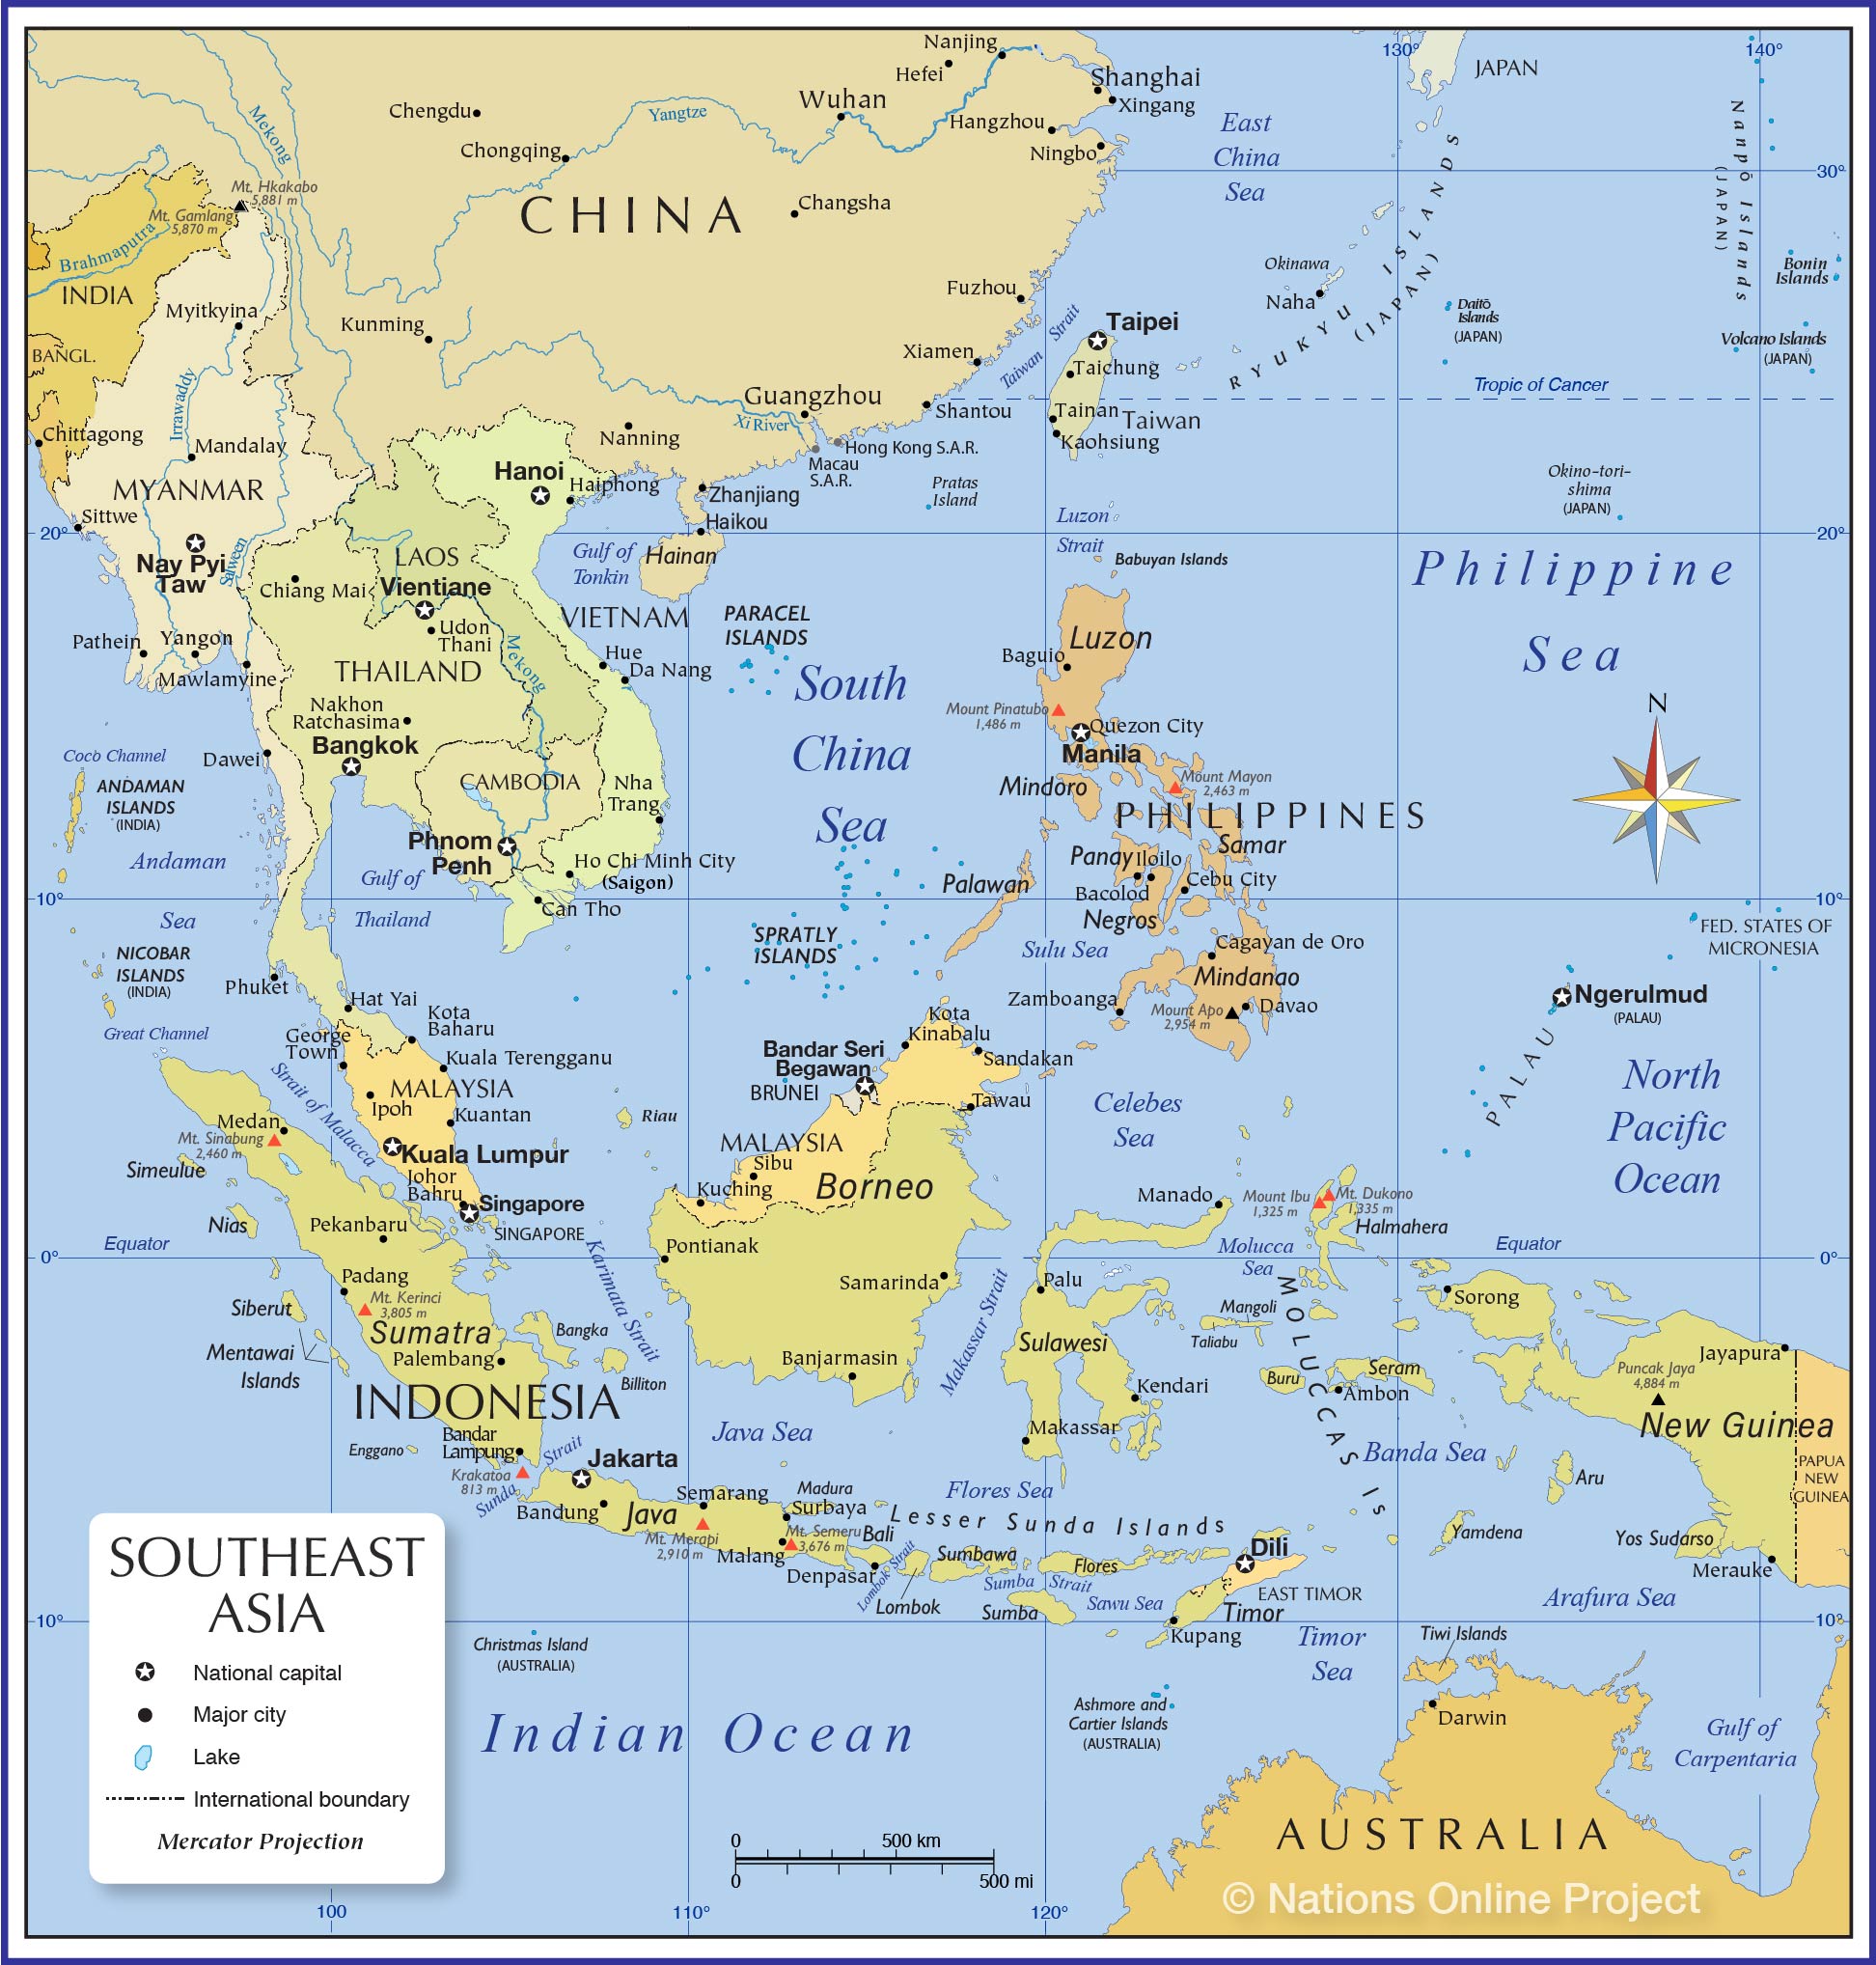 Political Map of Southeast Asia with countries, oceans, and major cities